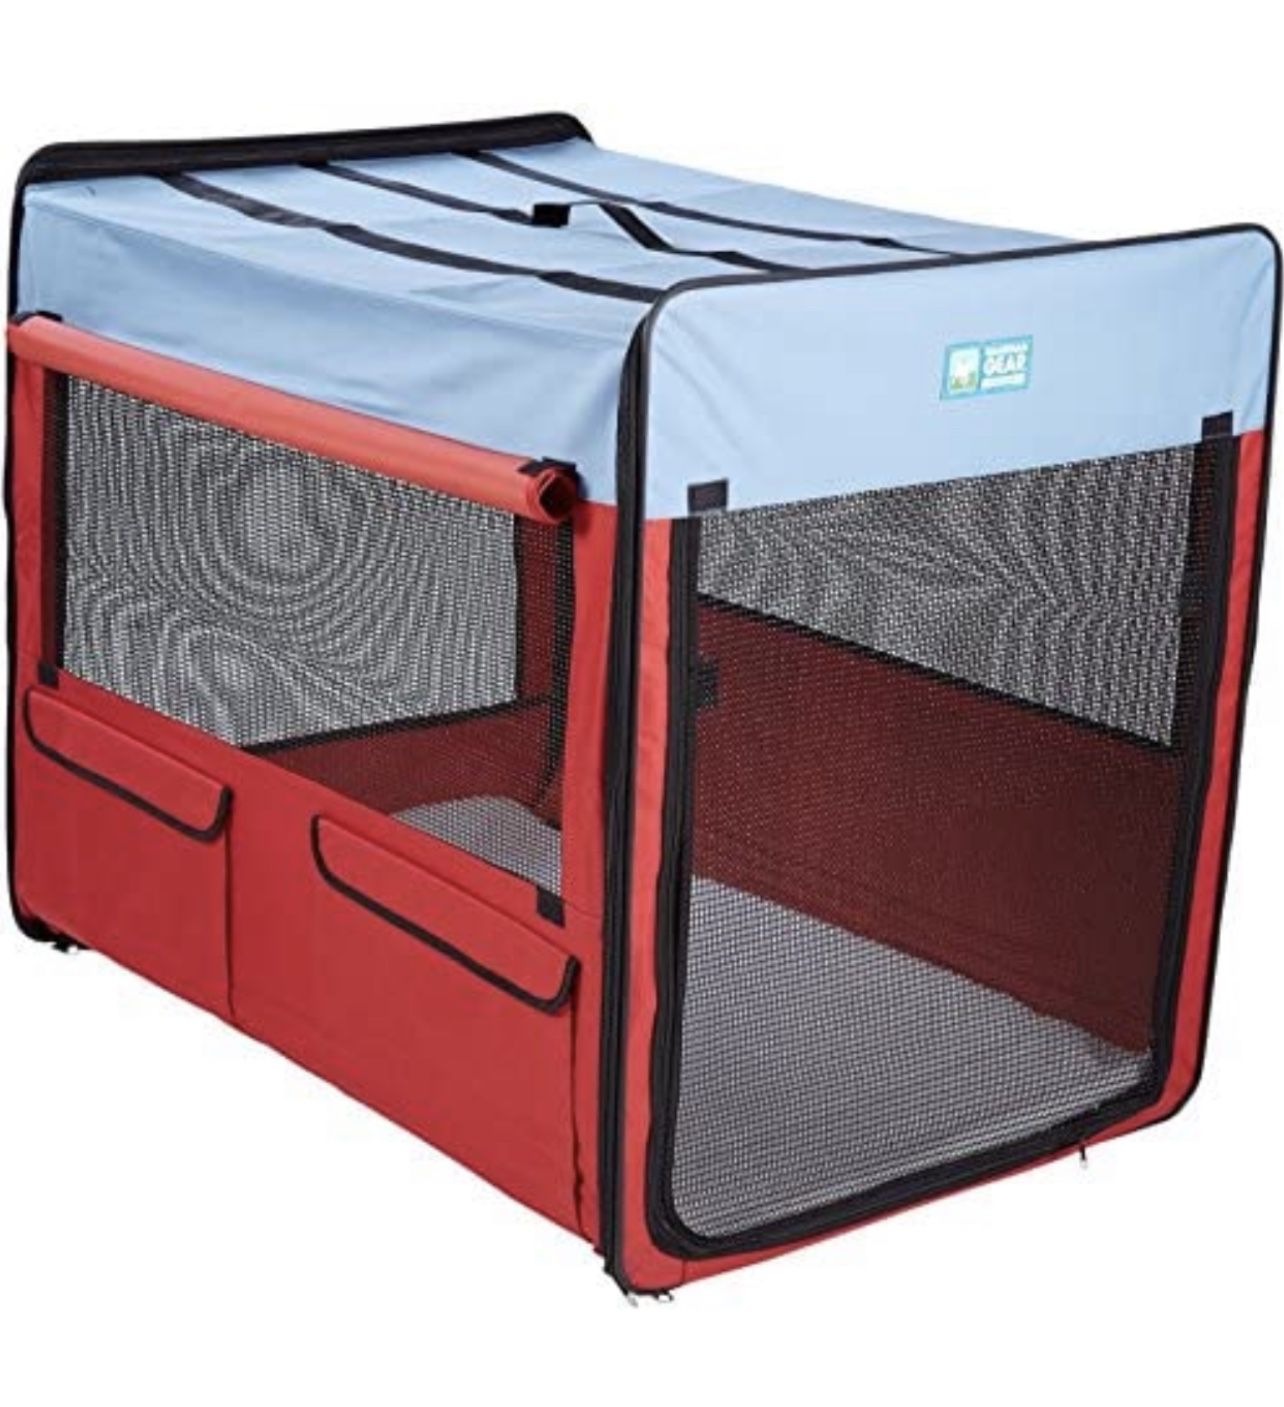 NEW Guardian Gear Collapsable Dog Crate Cage Kennel XL Travel Camping Pet Water Resistant Durable